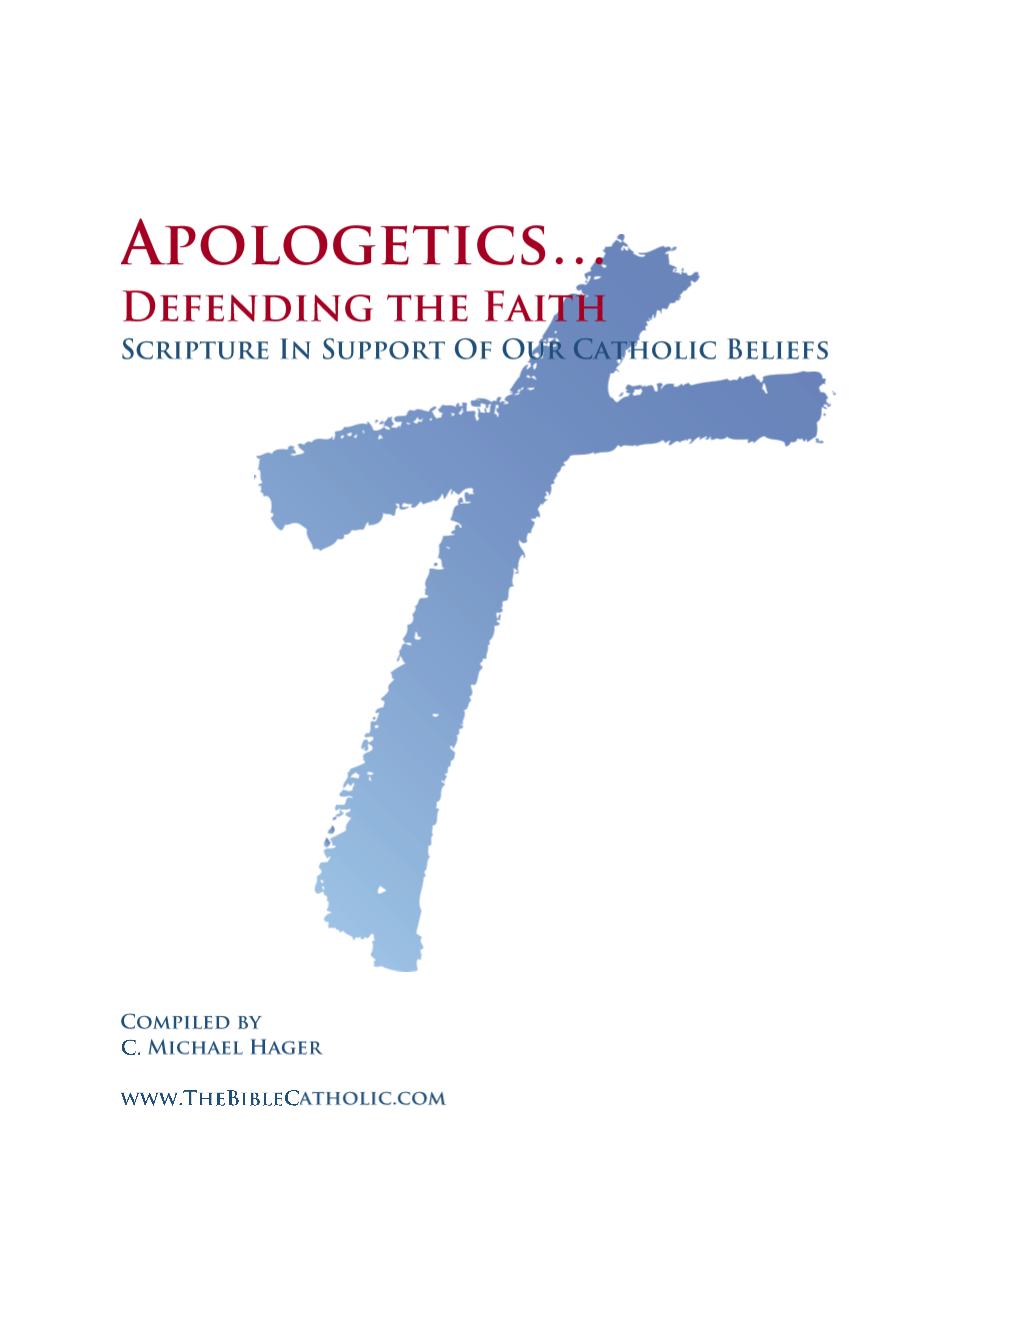 APOLOGETICS? “The Explanation of What We Believe and Why We Believe It Is Called Apologetics.1”